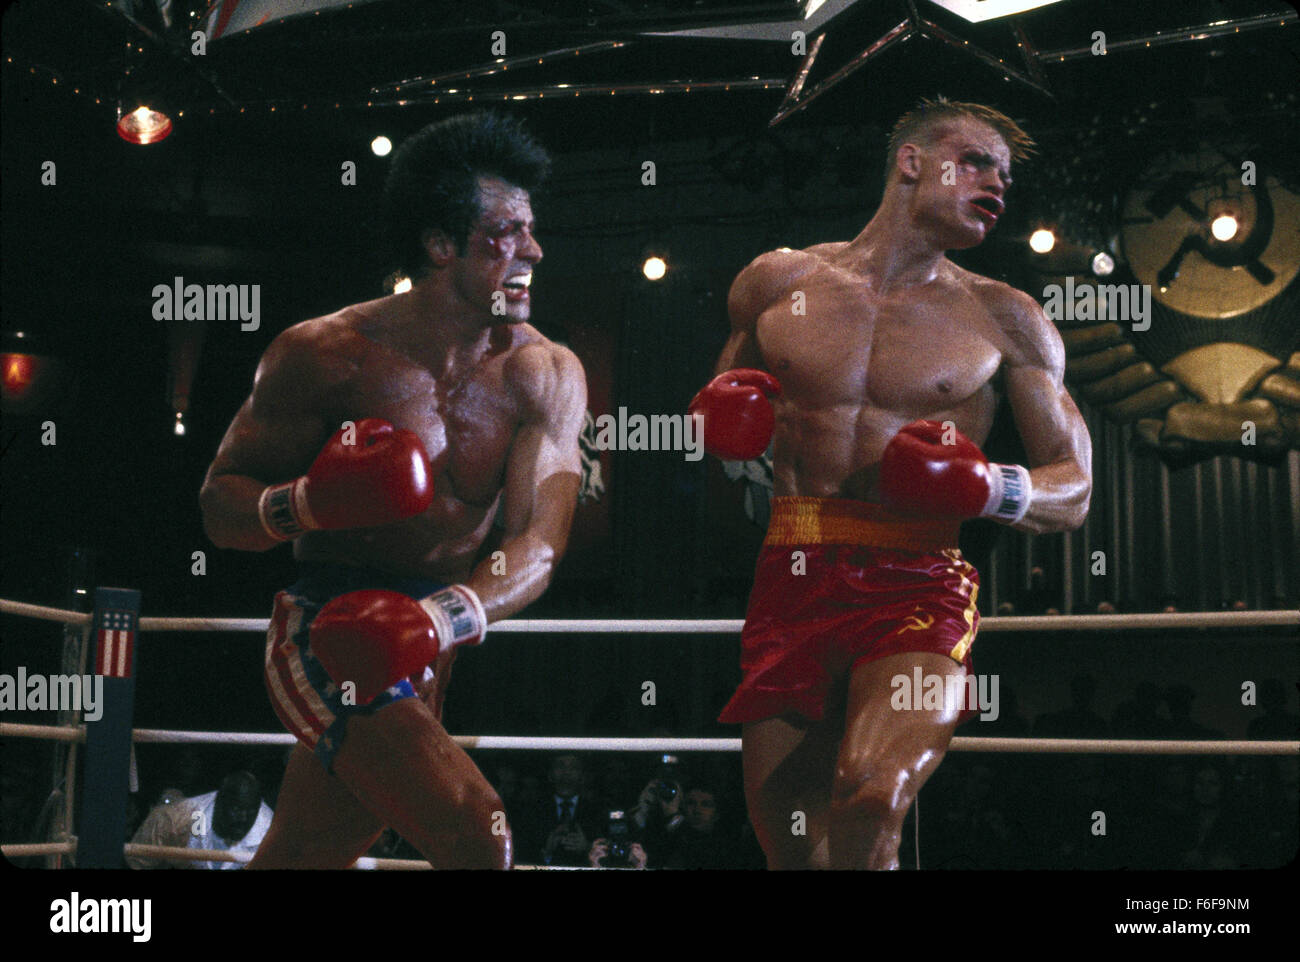 372 Rocky Iv Photos & High Res Pictures - Getty Images